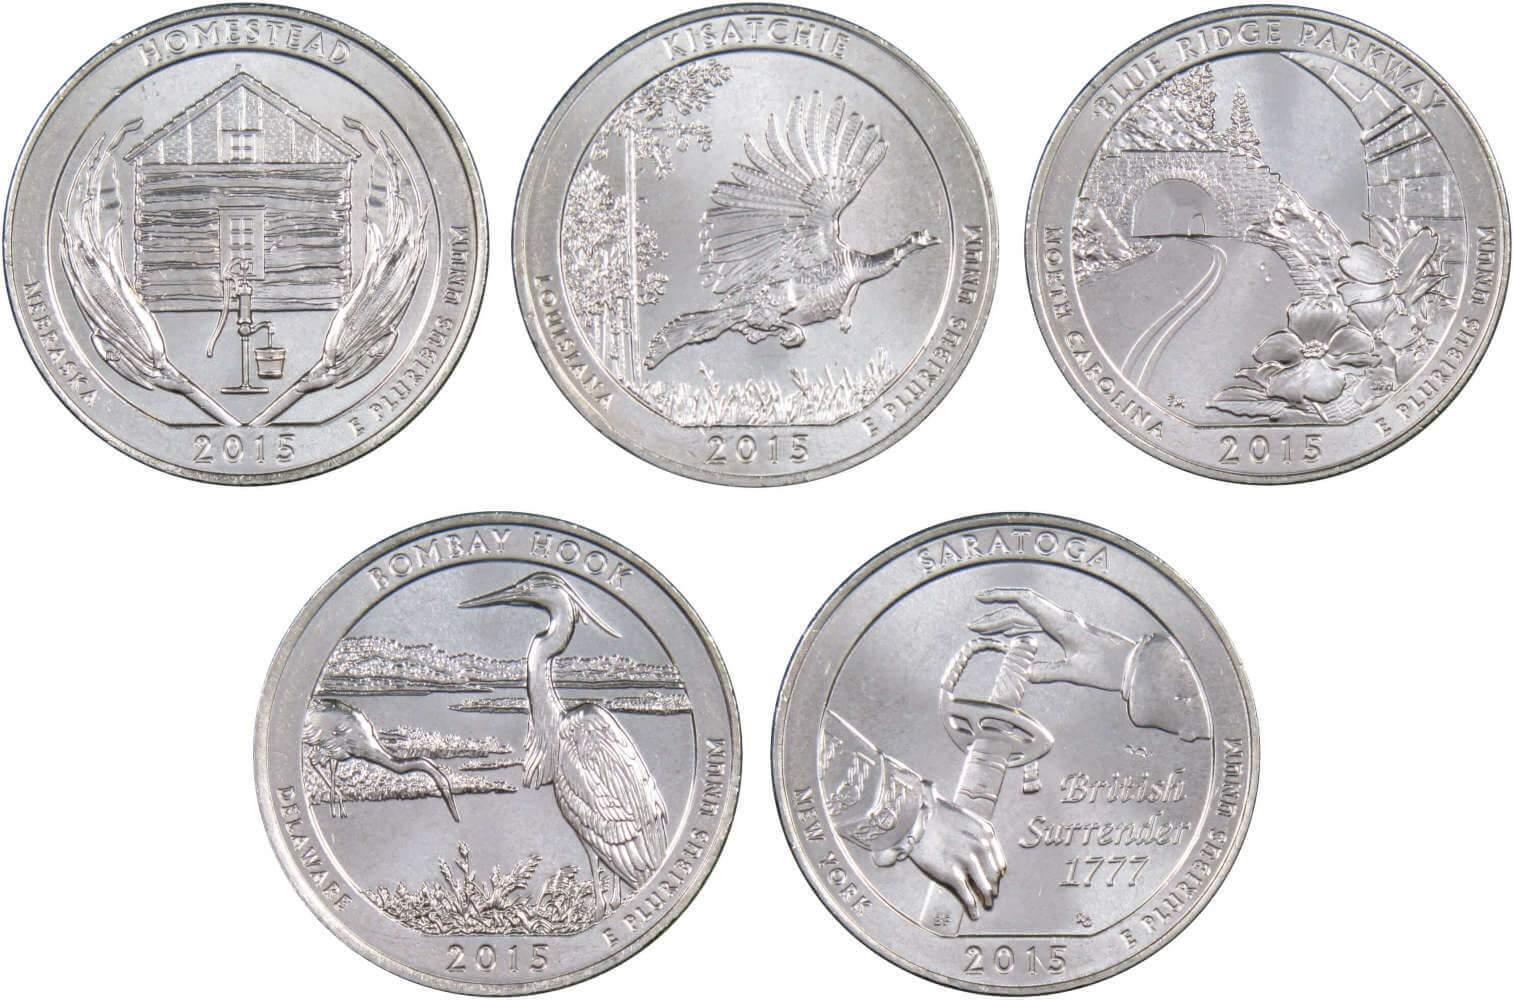 2015 D National Park Quarter 5 Coin Set Uncirculated Mint State 25c Collectible